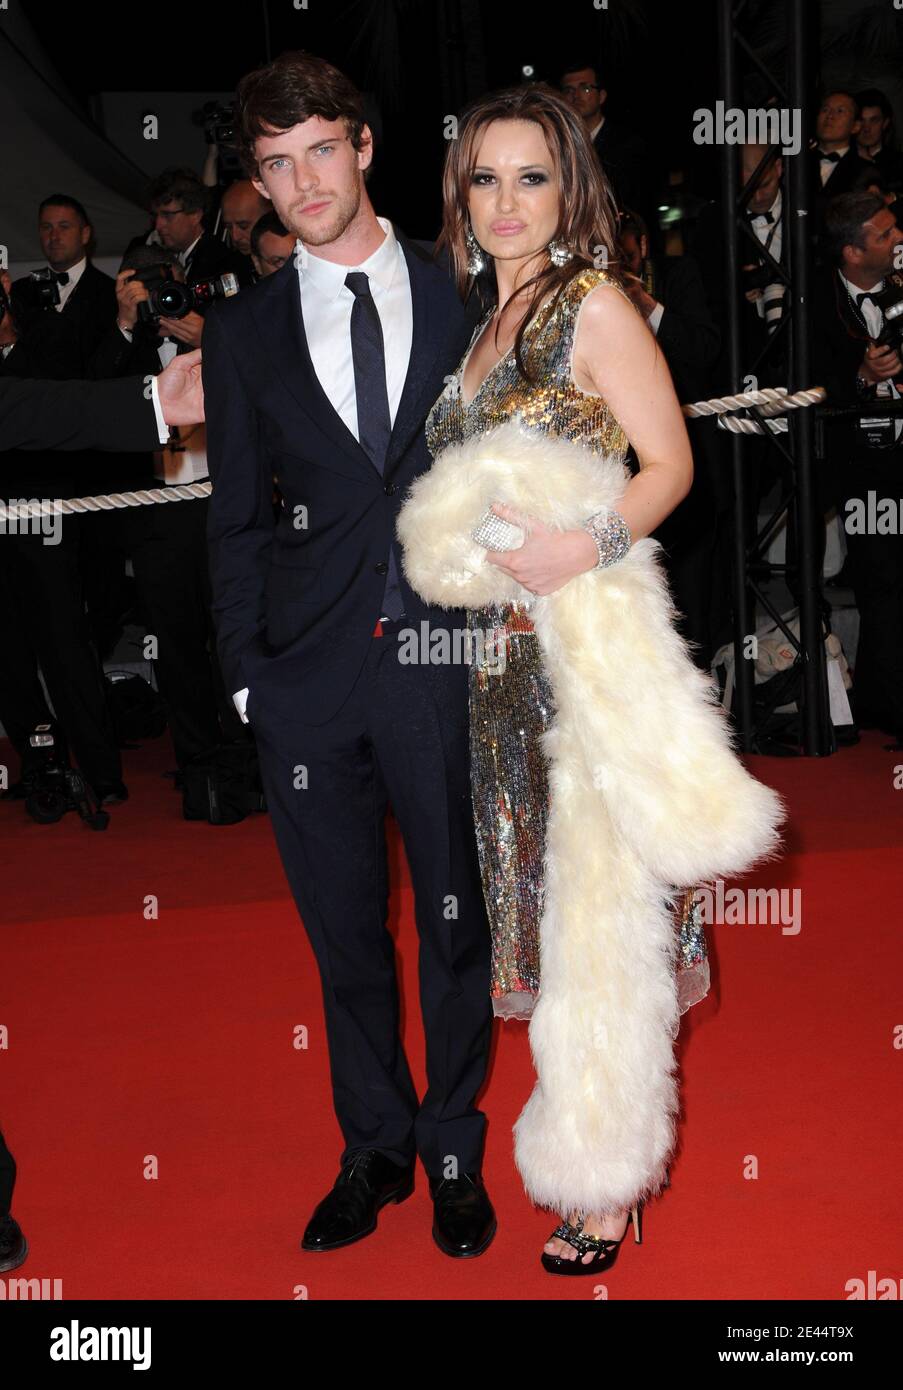 Harry Treadaway and Kierston Wareing attend the screening of Fish Tank at the 62nd Cannes Film Festival. Cannes, France, May 14, 2009. Photo by Lionel Hahn/ABACAPRESS.COM (Pictured: Kierston Wareing, Harry Treadaway) Stock Photo